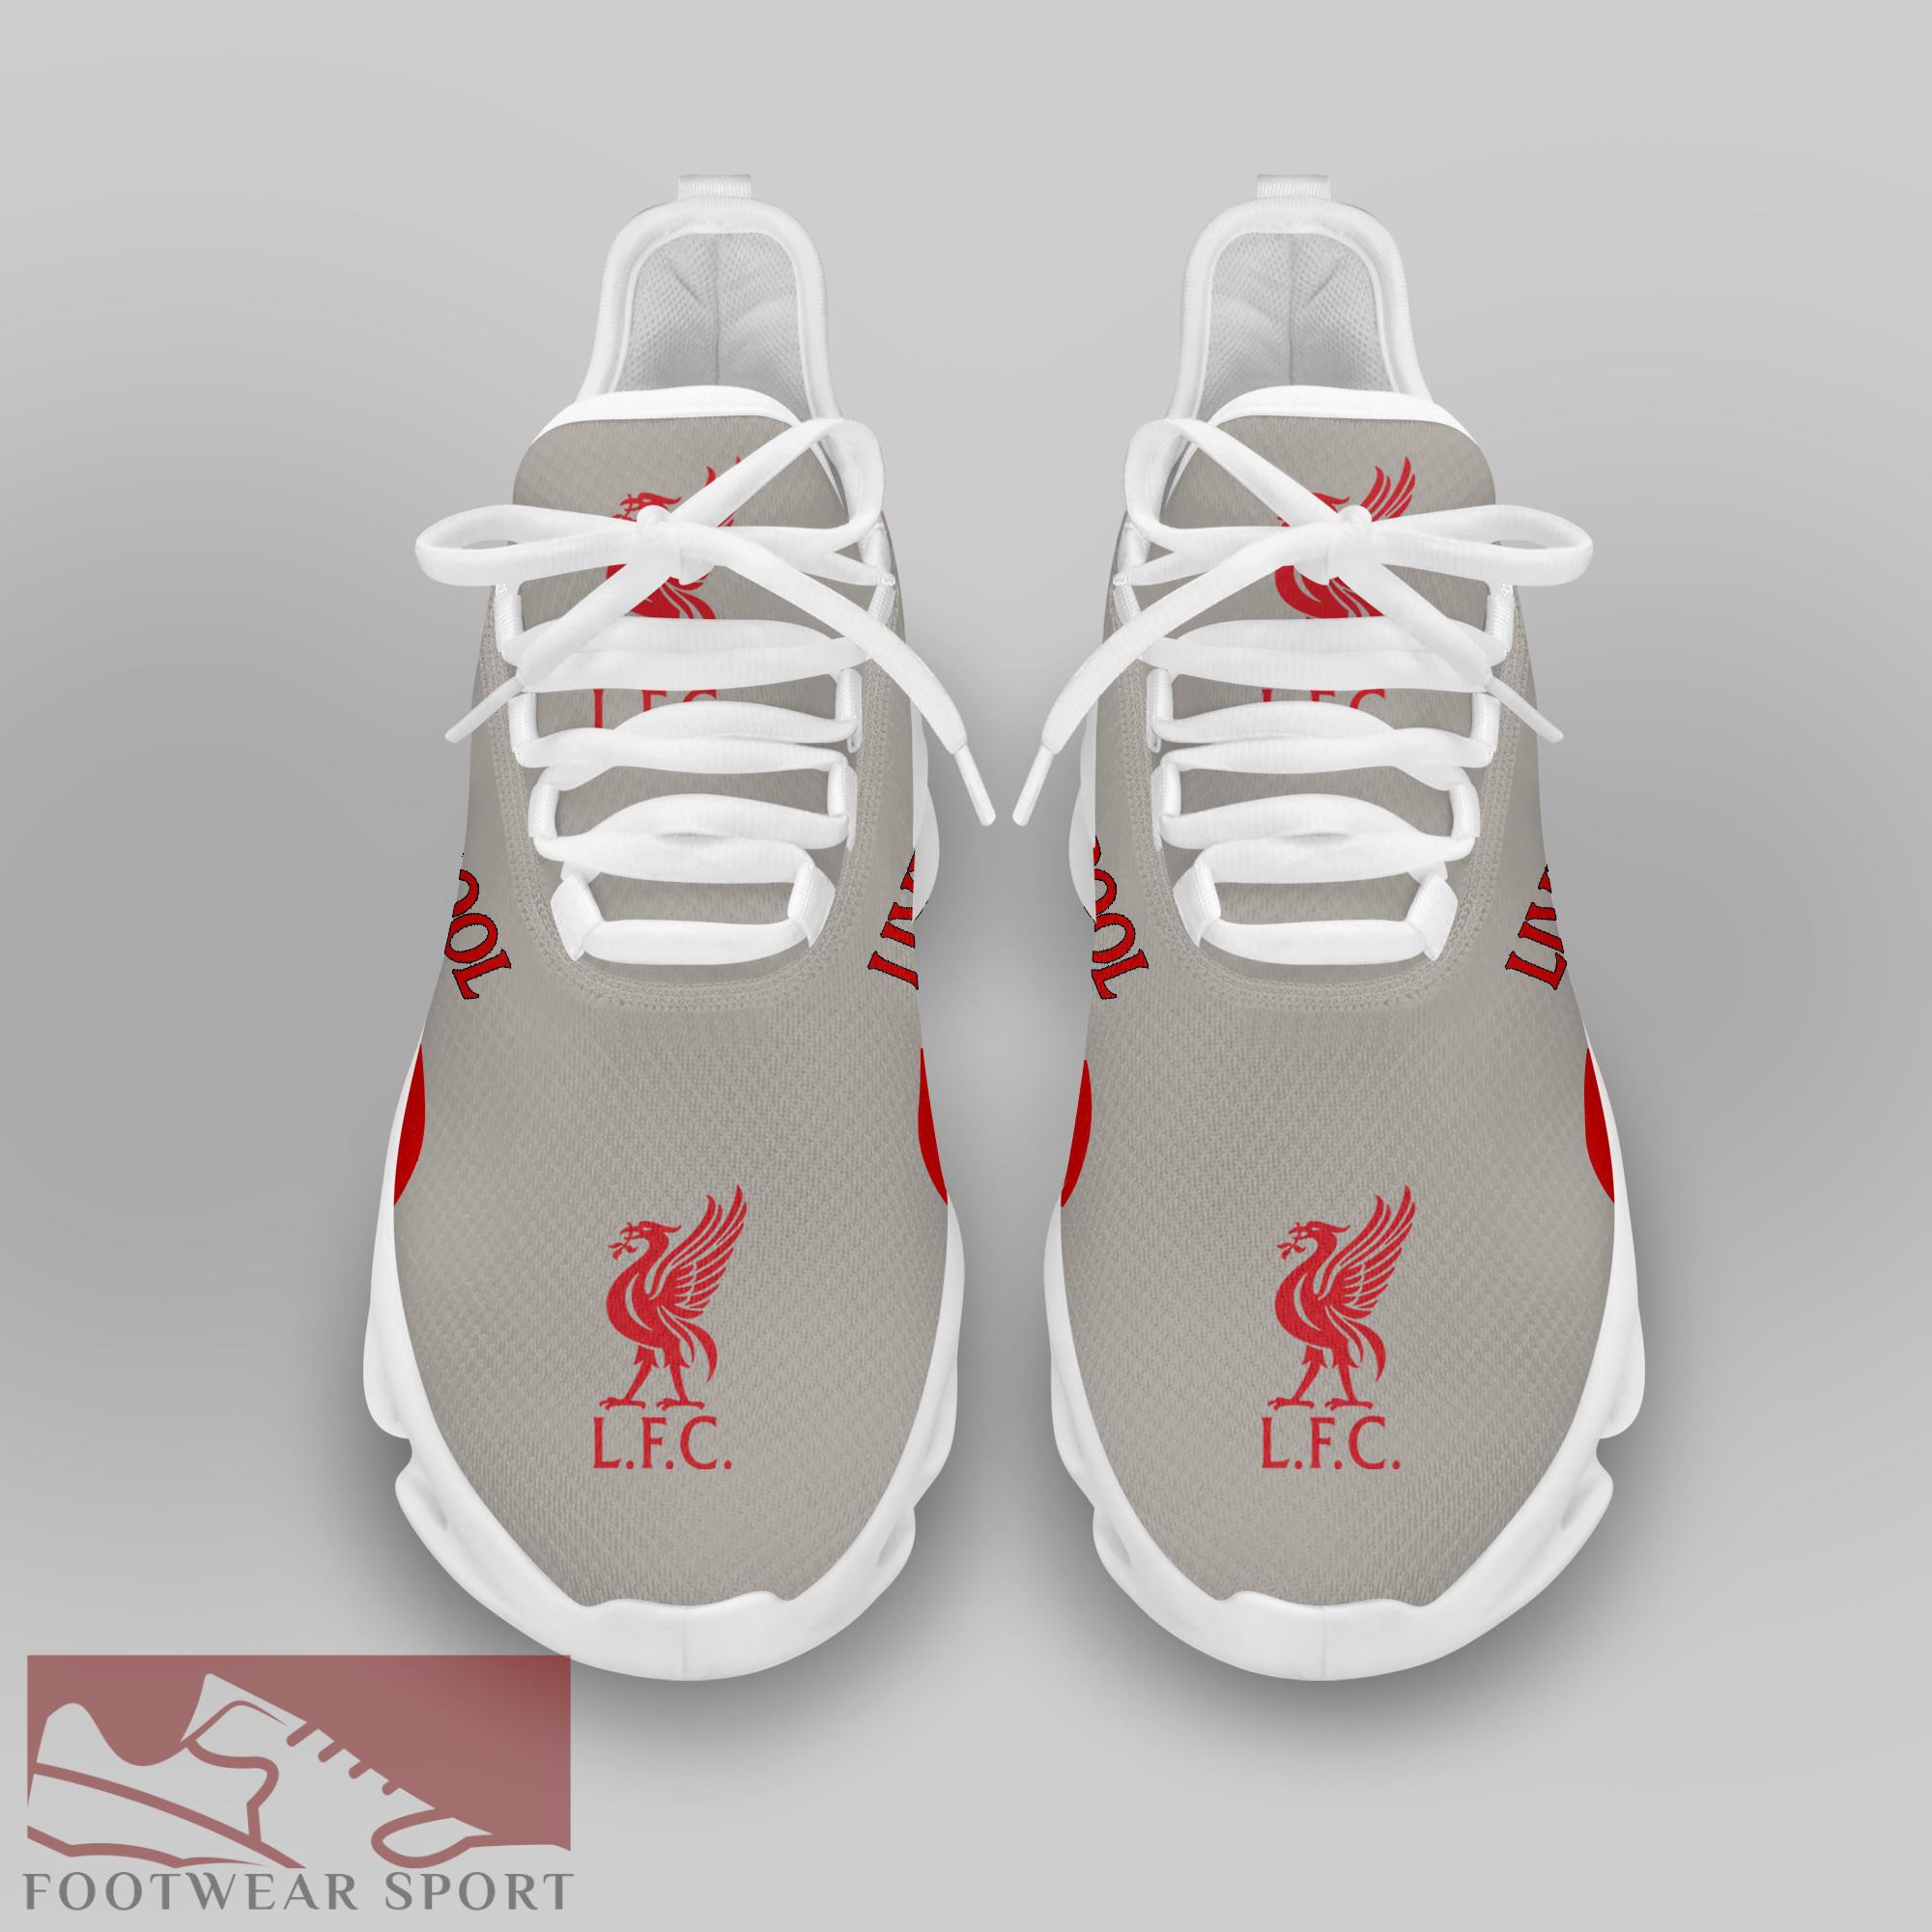 Liverpool FC Fans EPL Chunky Sneakers Modern Max Soul Shoes For Men And Women - Liverpool FC Chunky Sneakers White Black Max Soul Shoes For Men And Women Photo 3